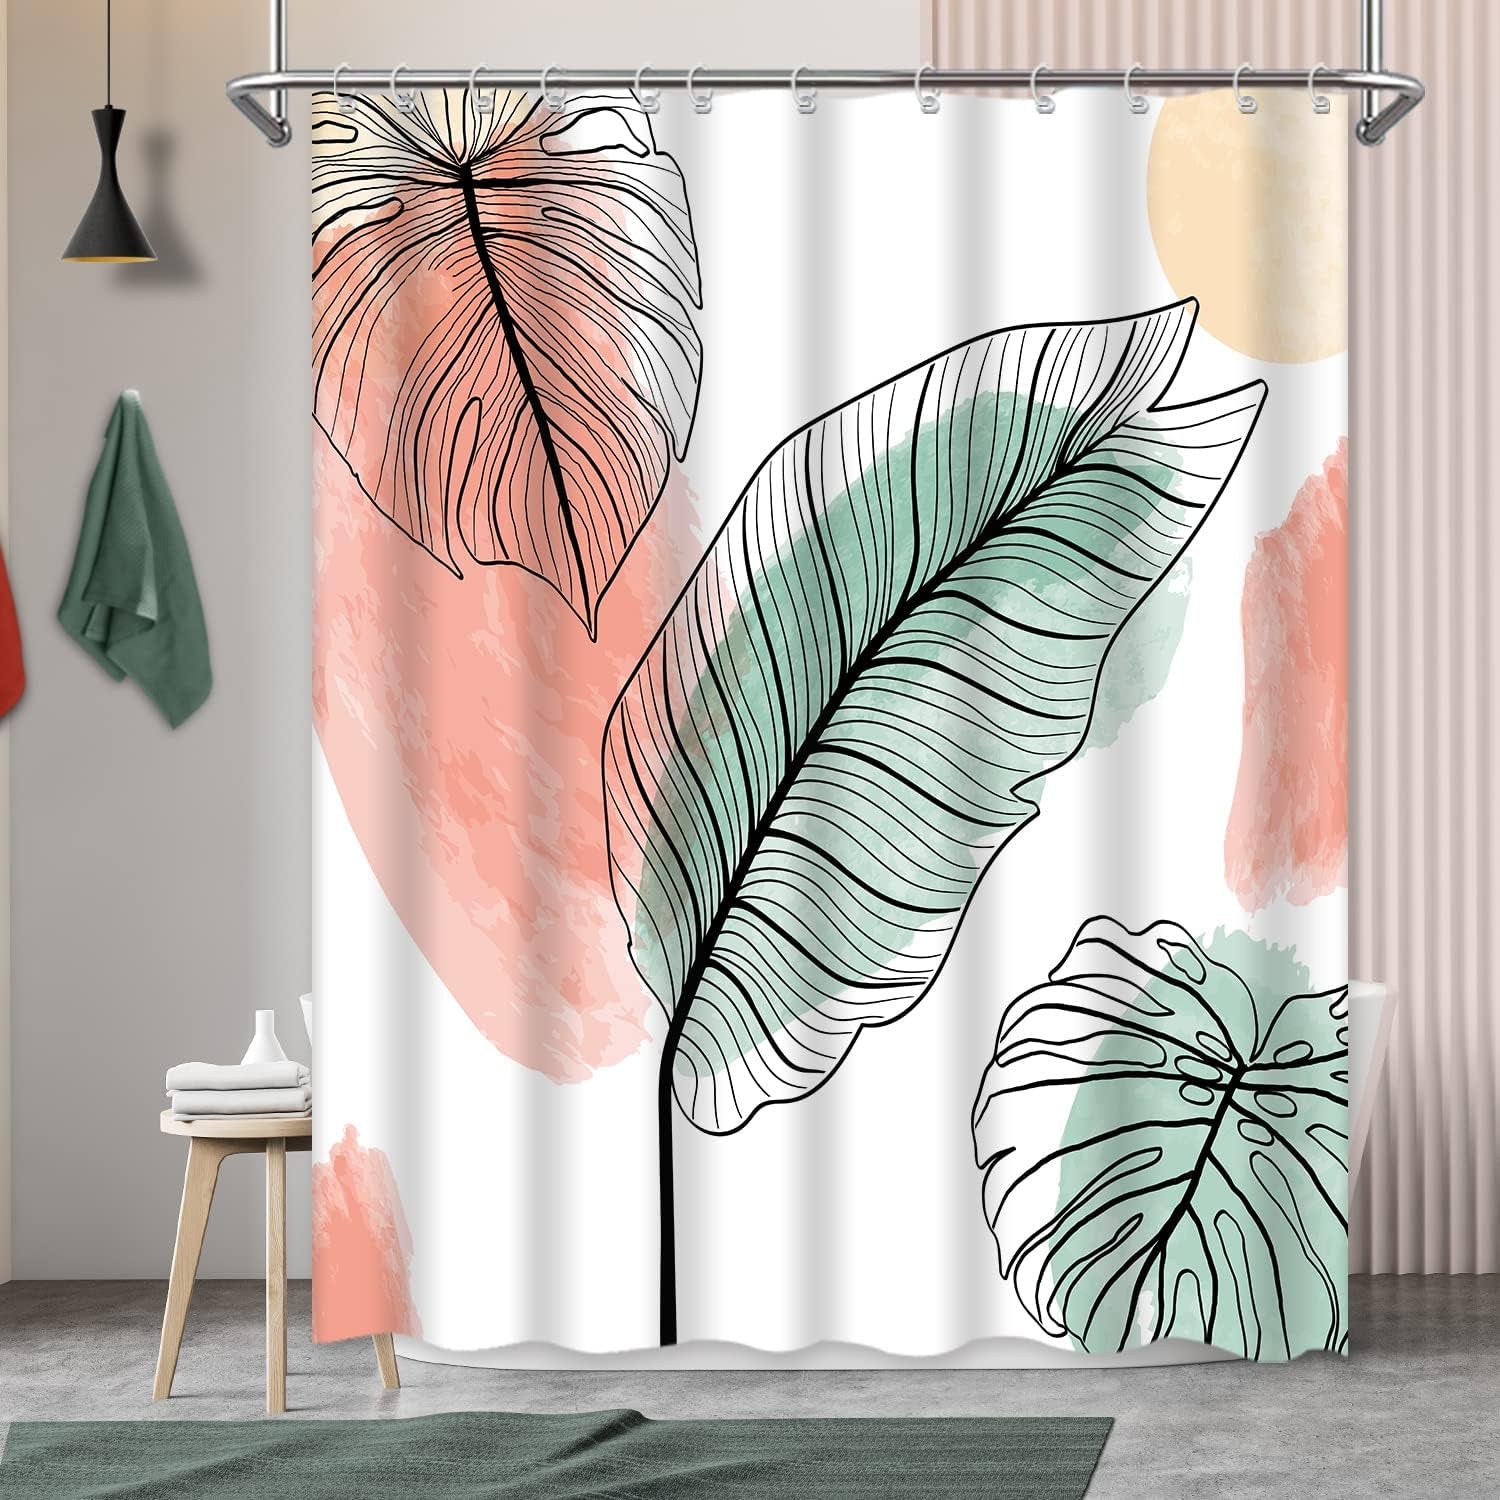 Green Hawaii Tropical Shower Curtain Tropical Leaves Plant Shower Fabric Shower Curtains for Bathroom Botanical Jungle Shower Curtain Set with 12 Hocks, 72X72 Inch